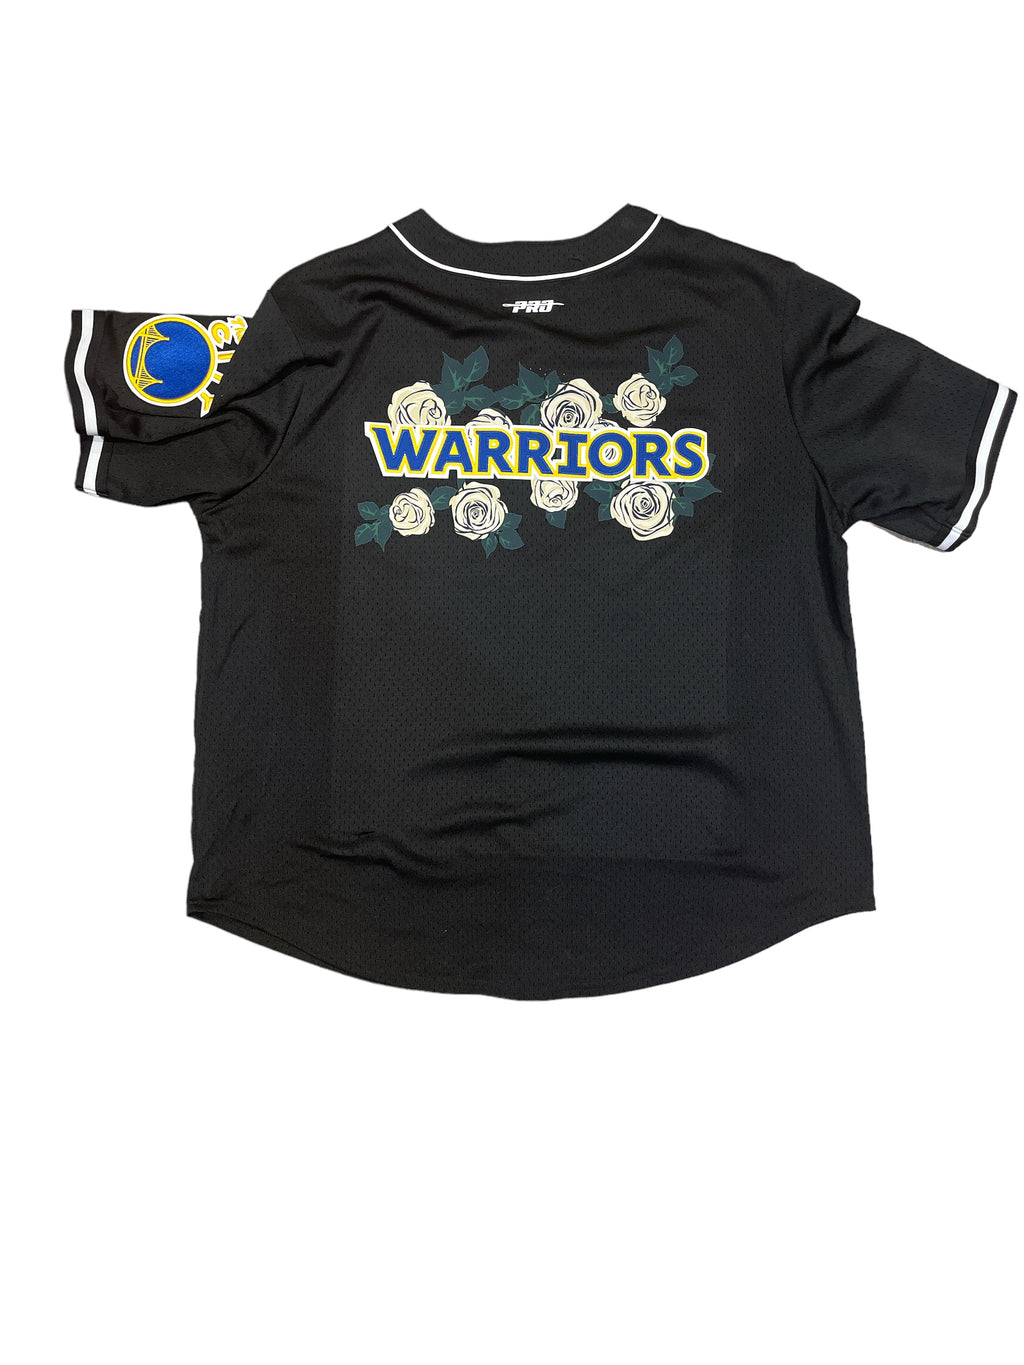 golden state jersey rose